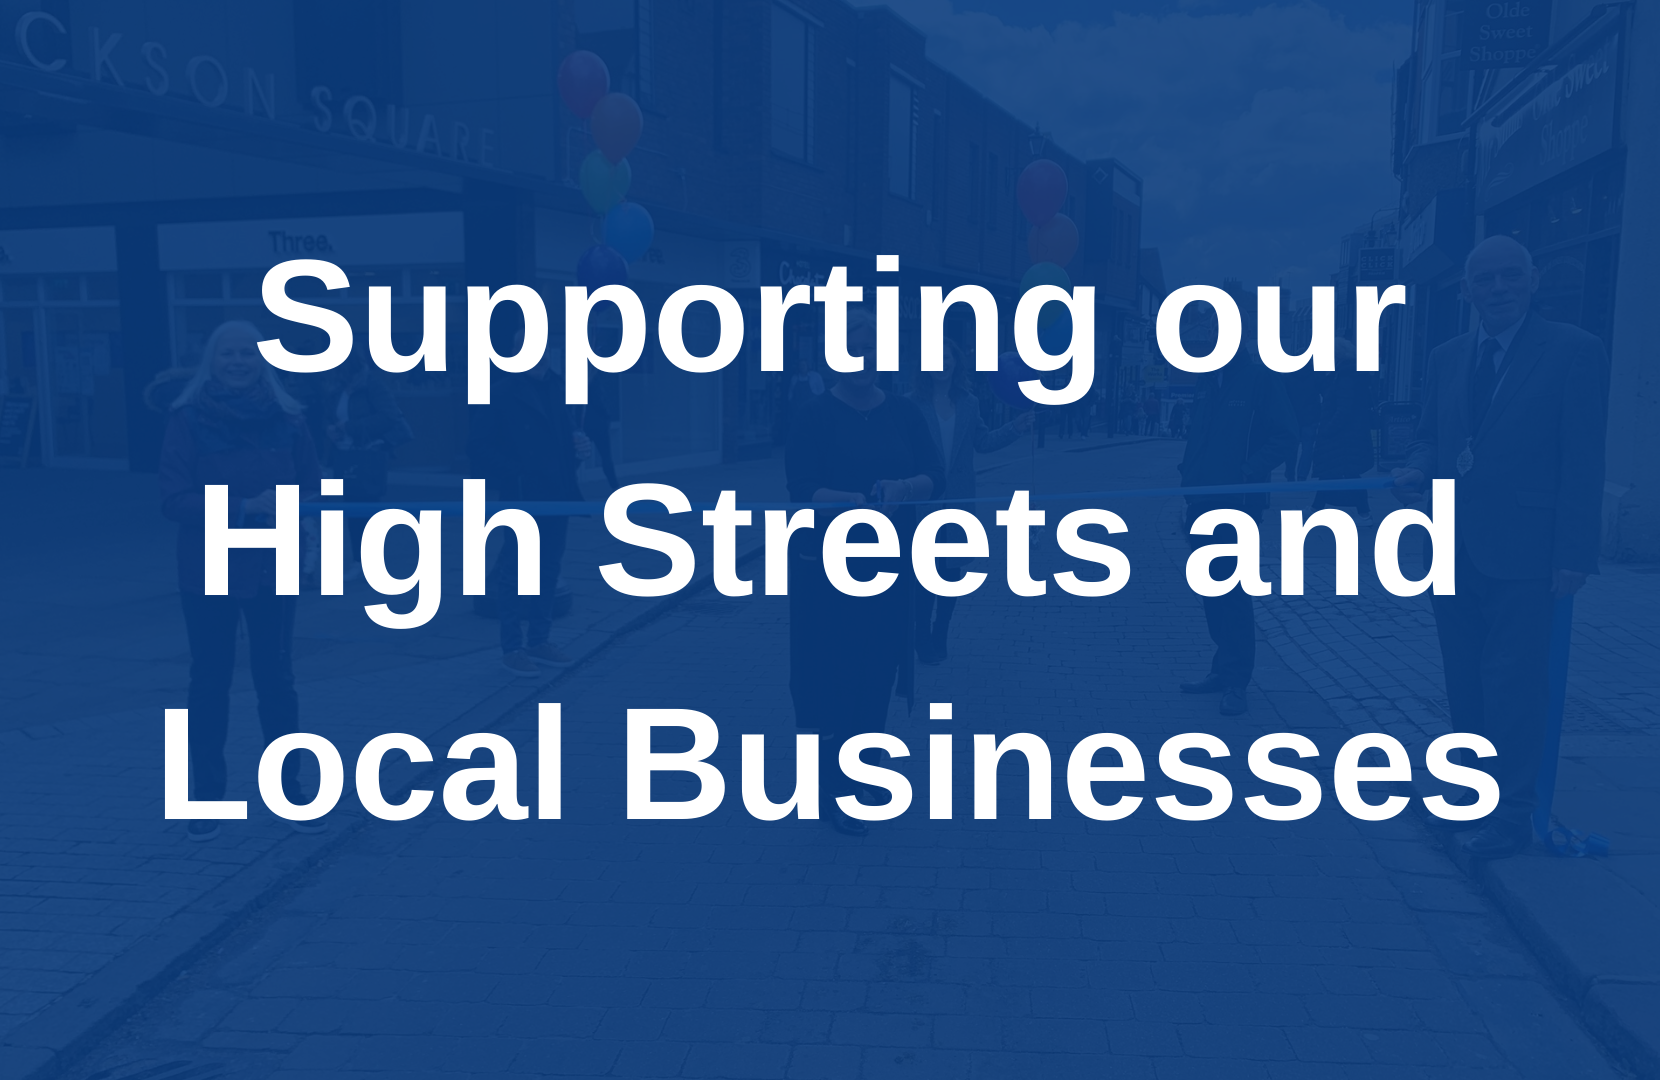 Supporting our High Streets